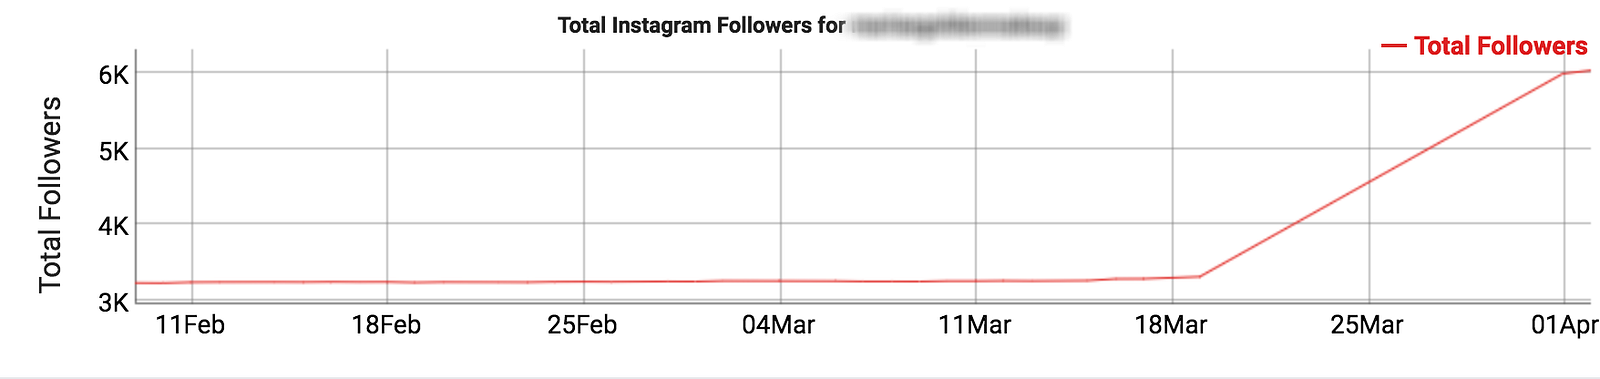 suspicious sudden follower growth but does that mean this influencer bought followers source socialblade - sudden spike in instagram followers